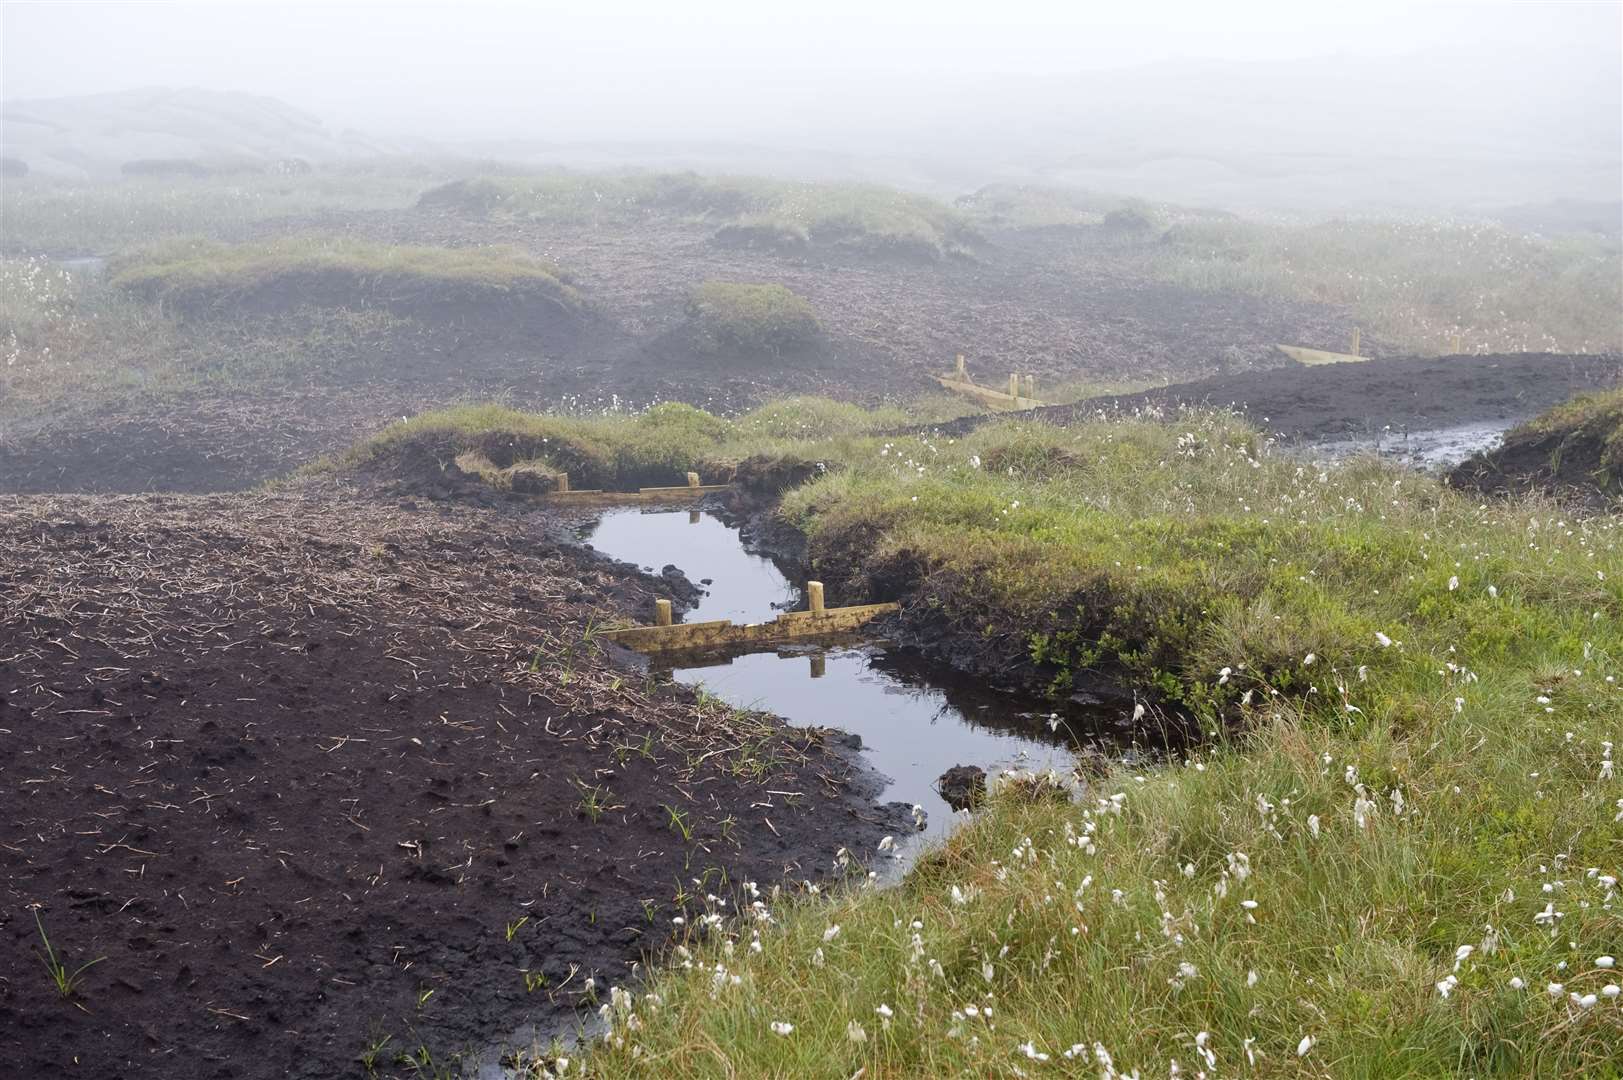 Efforts are being made to restore peatlands, such as at High Peak in Derbyshire (Leo Mason/National Trust/PA)